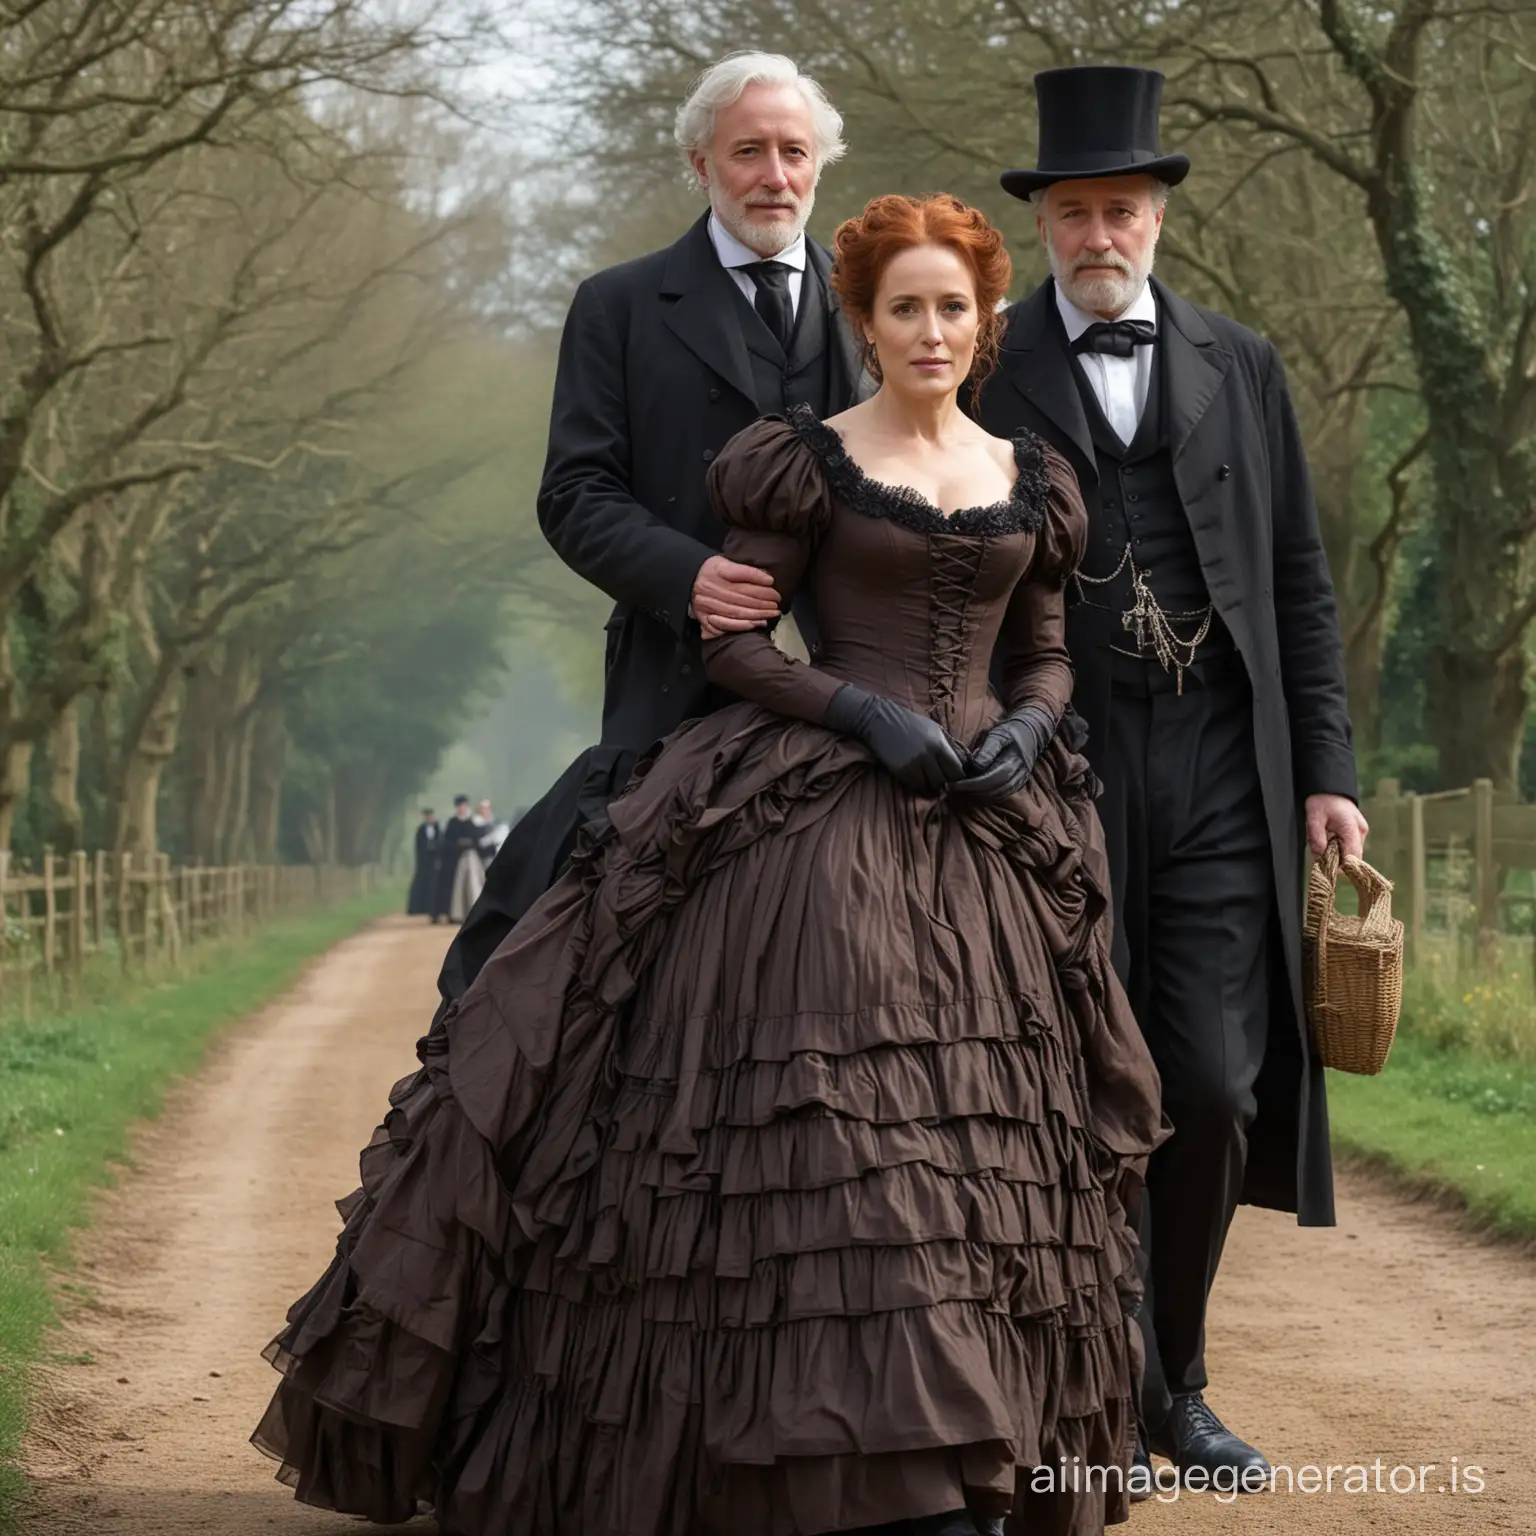 red hair Gillian Anderson wearing a dark brown floor-length loose billowing 1860 Victorian crinoline dress with a frilly bonnet walking hand in hand with an old man dressed into a black Victorian suit who seems to be her newlywed husband